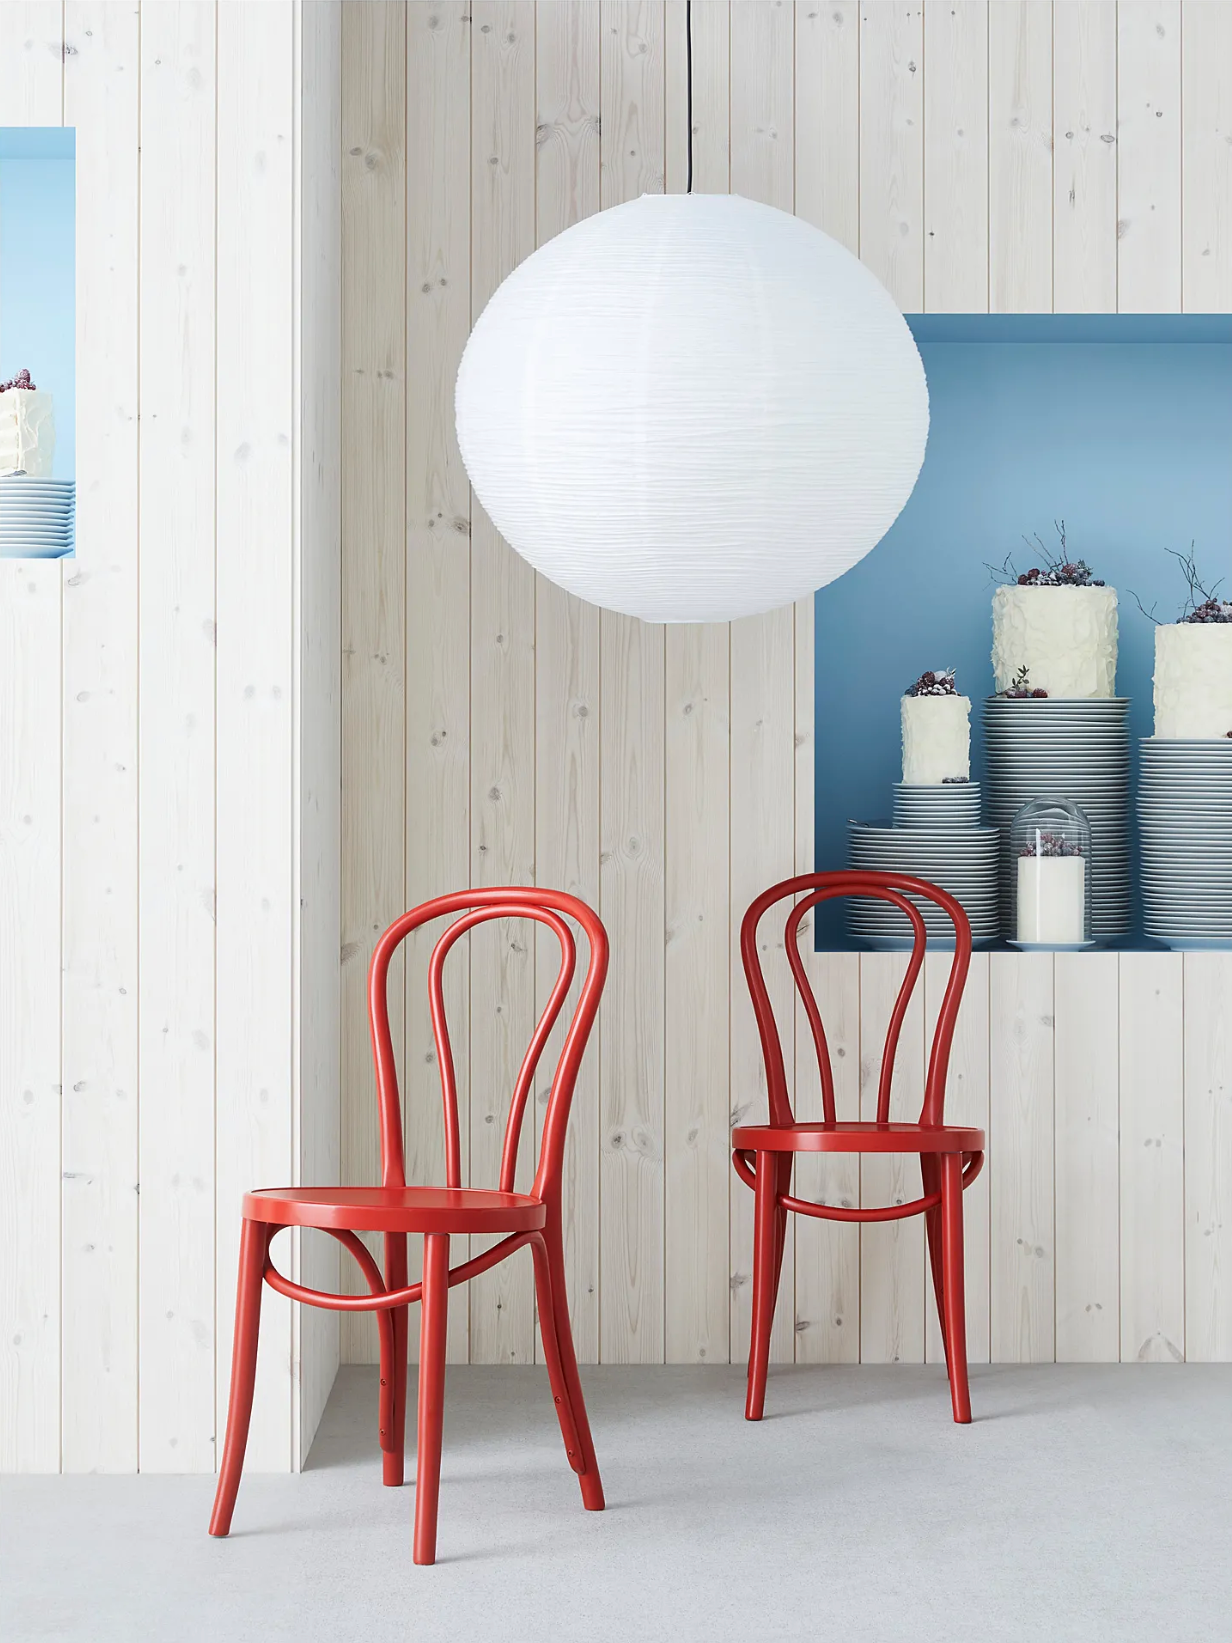 10 Stylish Finds We Discovered on Our Last IKEA Trip